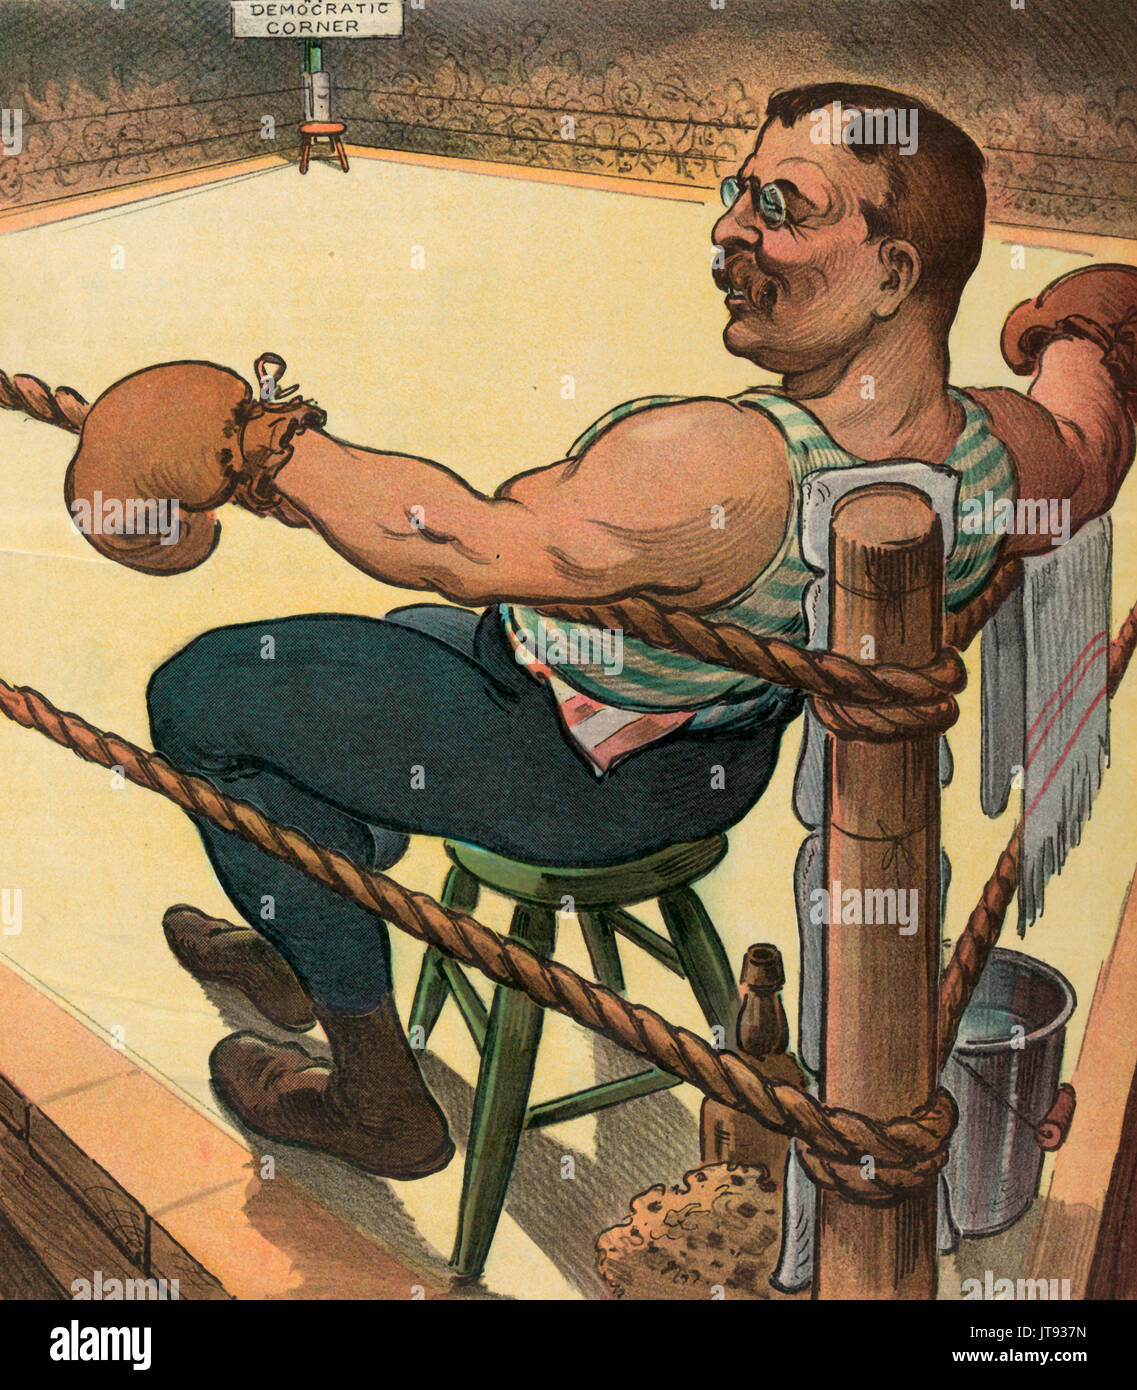 'Terrible Teddy' waits for 'the unknown'.  Illustration shows President Theodore Roosevelt as a boxer sitting on a stool with his arms resting on the ropes in the near corner of a boxing ring, waiting for a challenger to enter the ring and sit in the vacant chair in the 'Democratic Corner'. Political Cartoon, 1904 Stock Photo